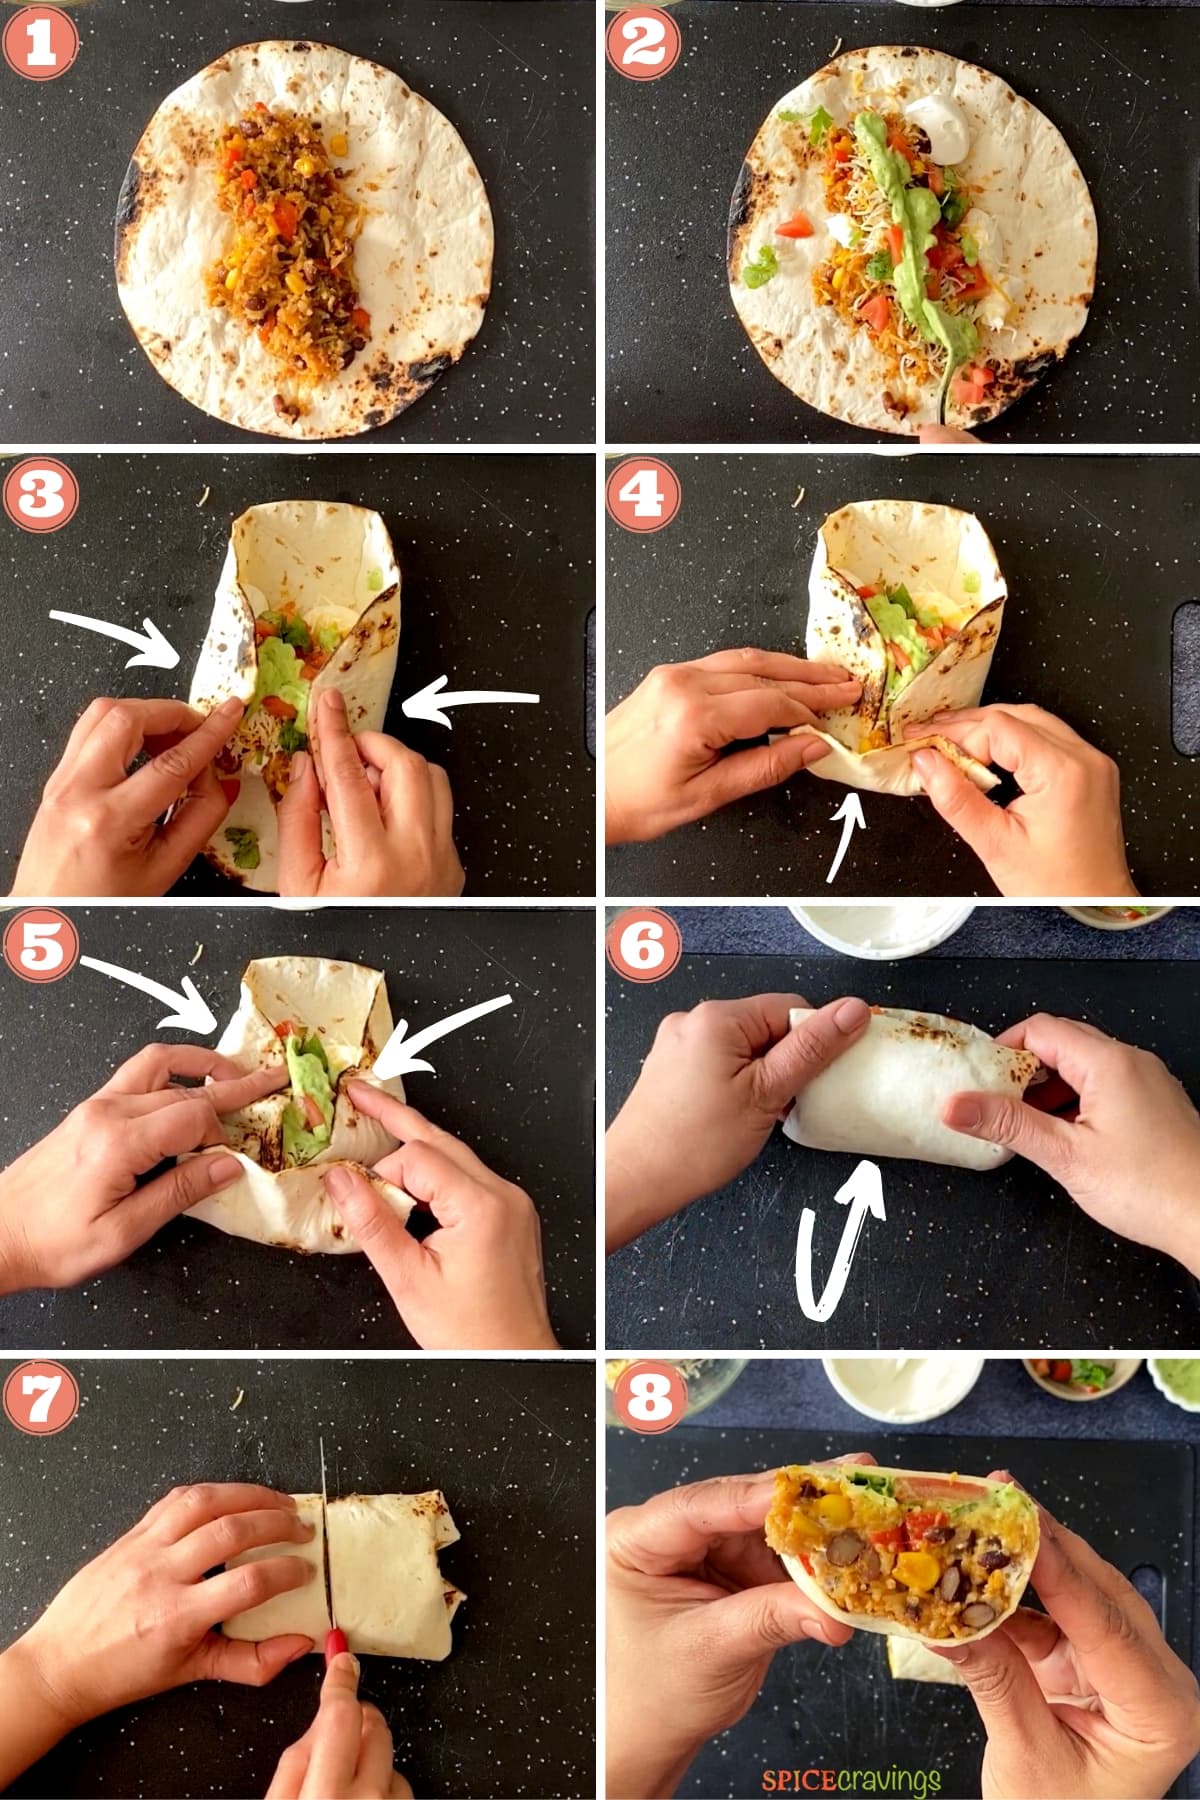 rice and beans on tortilla, Mexican toppings, two hands folding and rolling burrito, slicing burrito in half, sliced vegetarian burrito